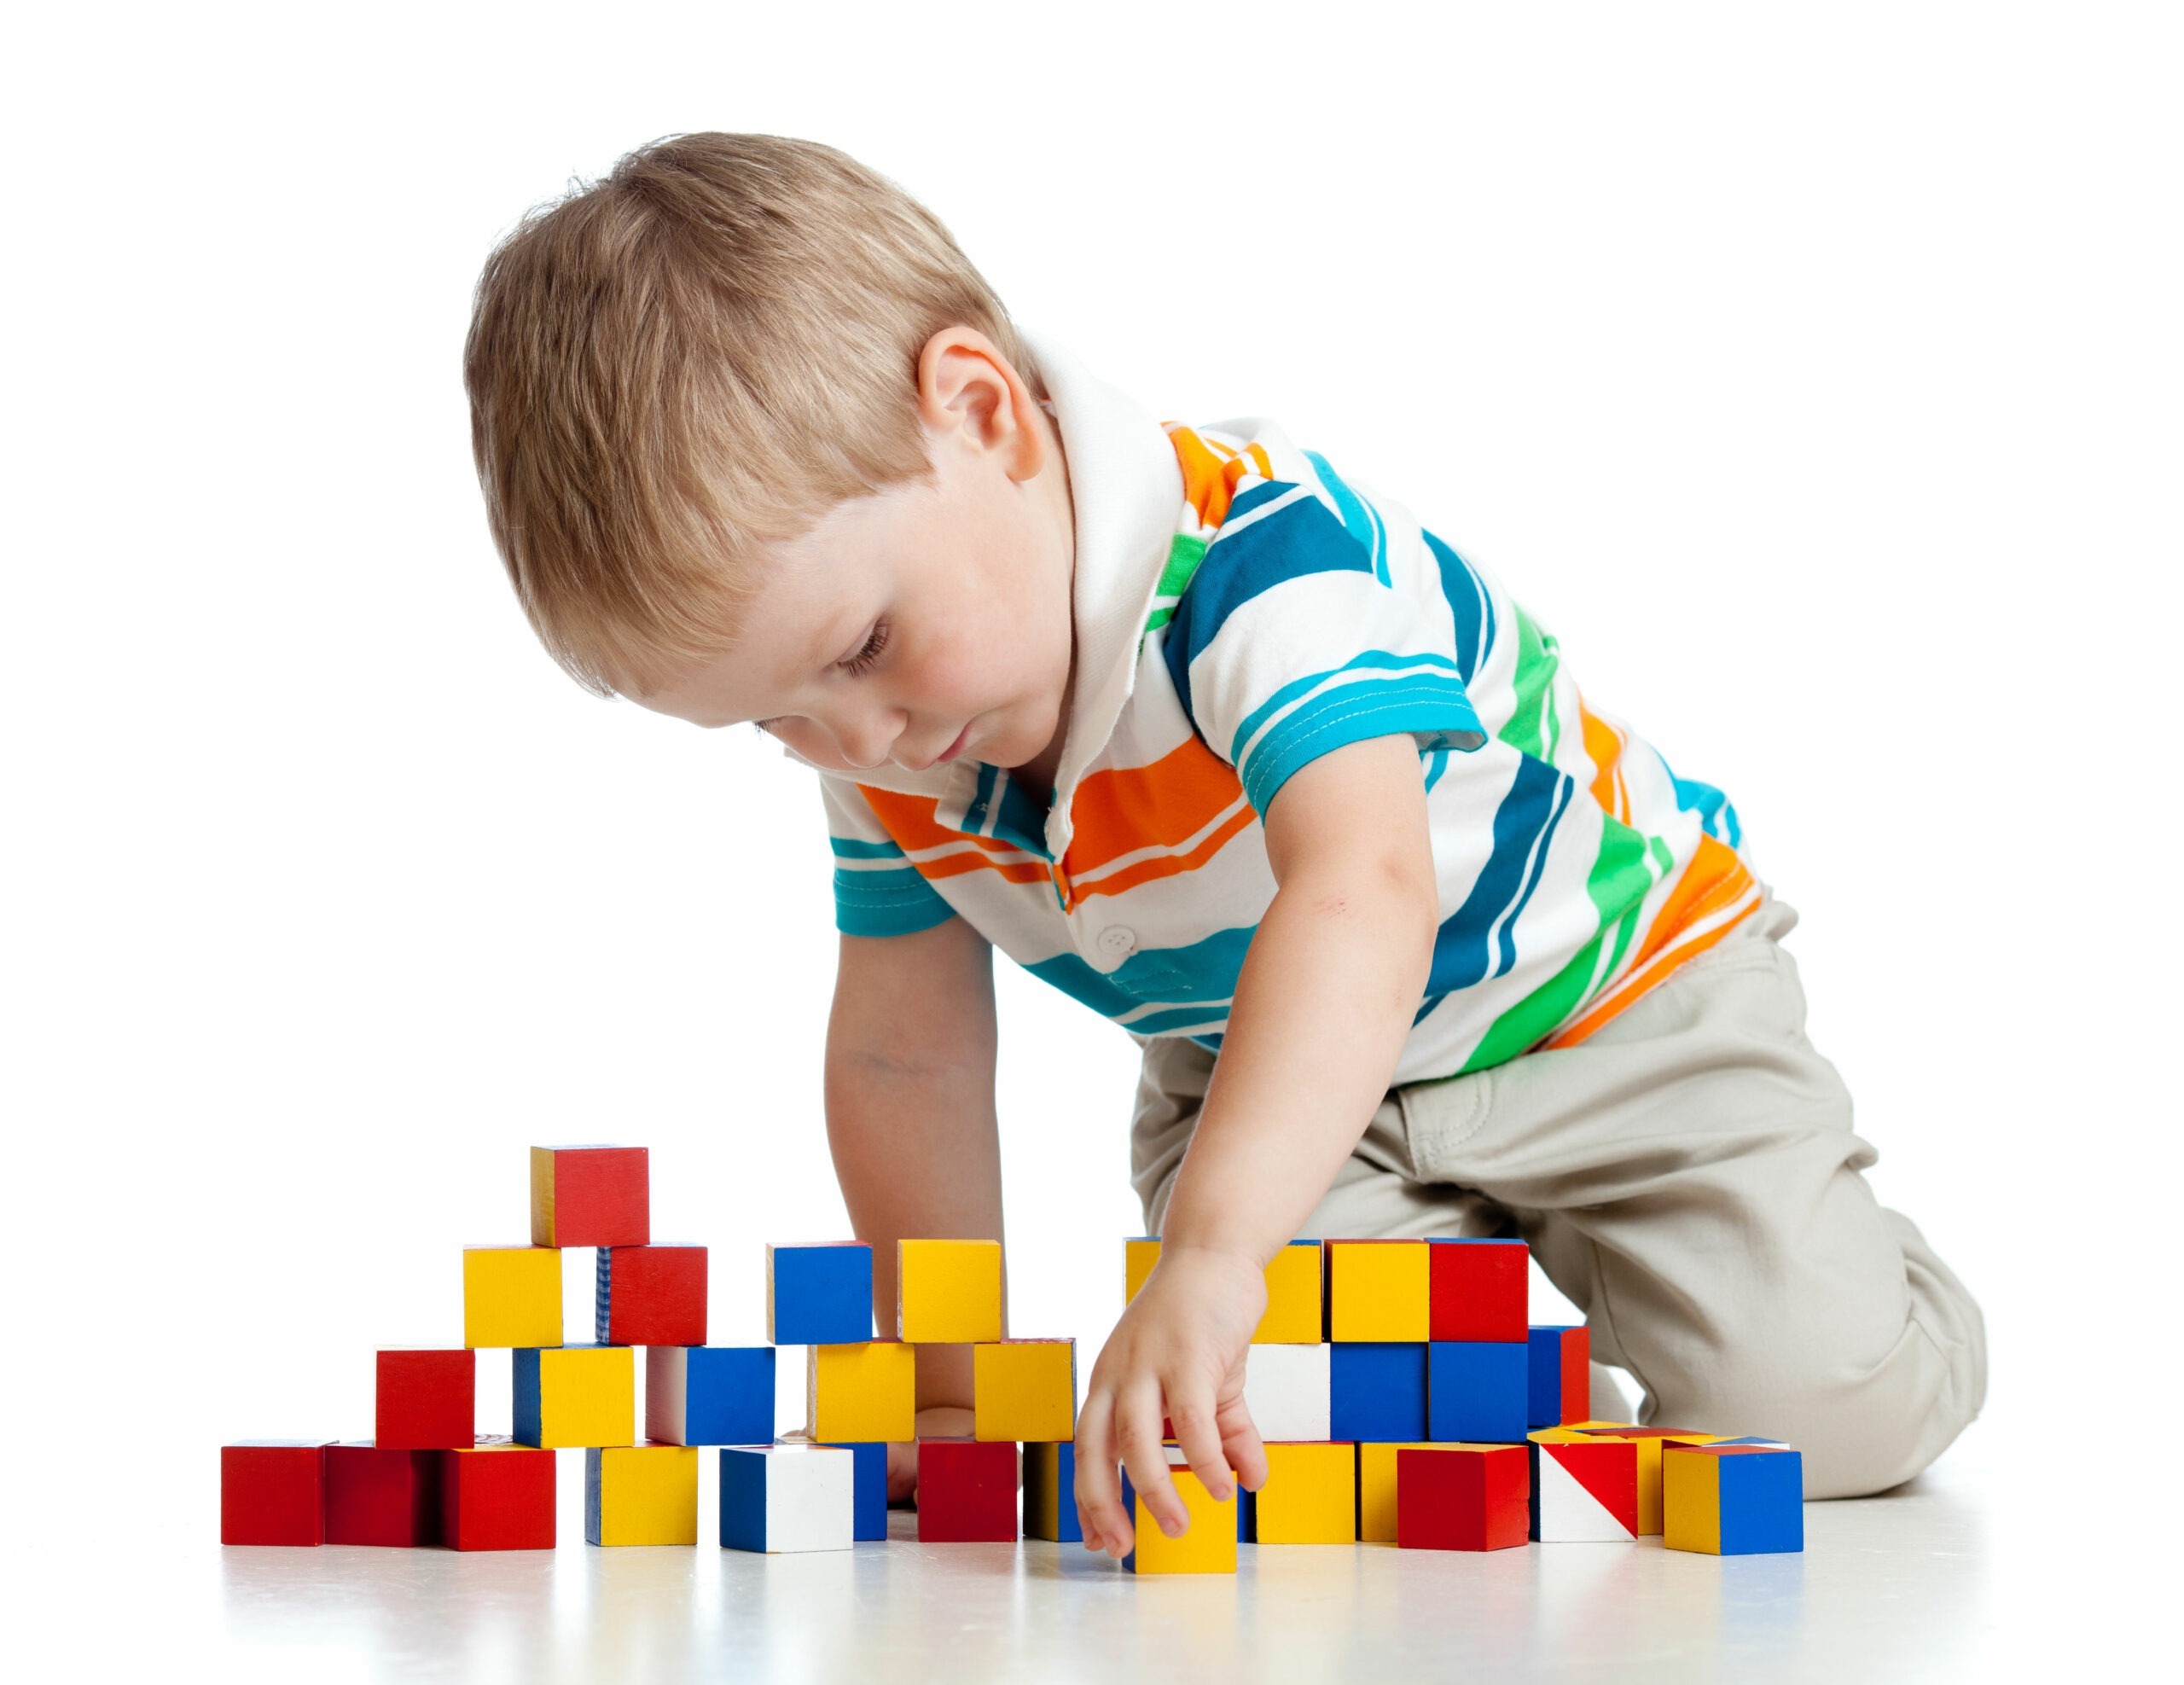 Image with a kid playing with cubes